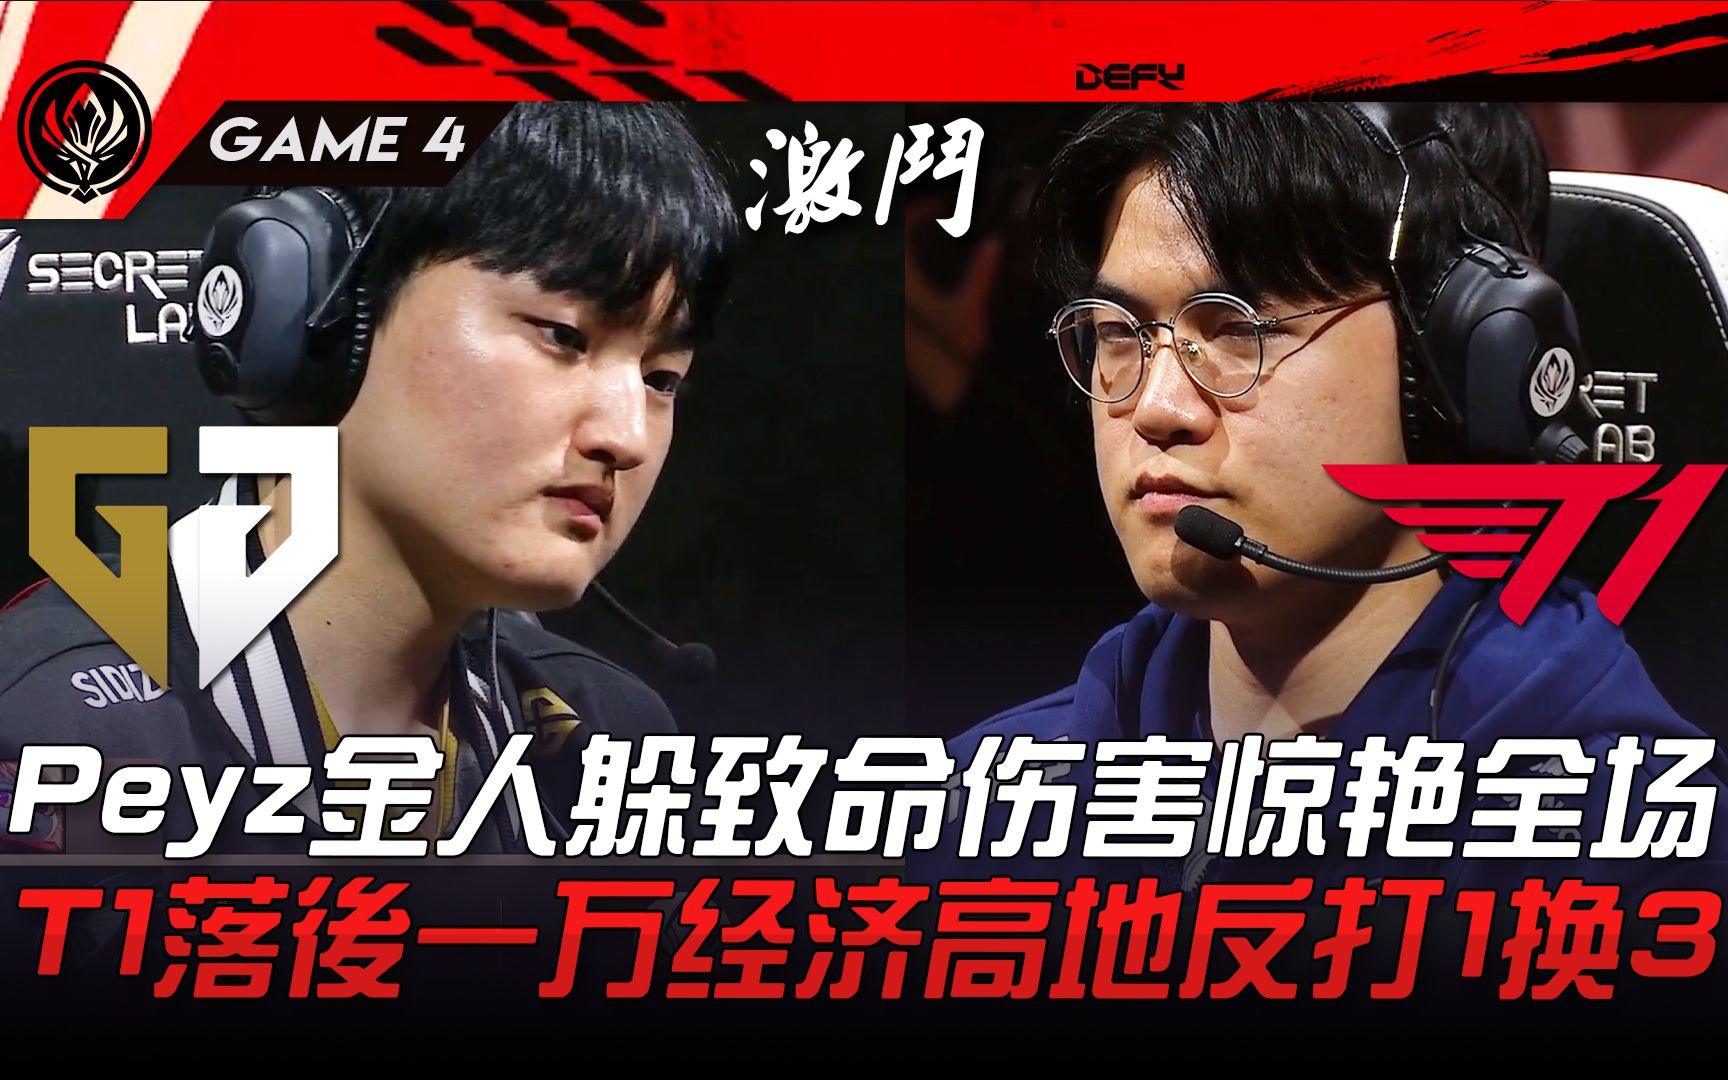 MSI 2023’s T1 vs JDG Upper Bracket Finals Sets a New Record With 2.29M Peak Viewers - Esports ...